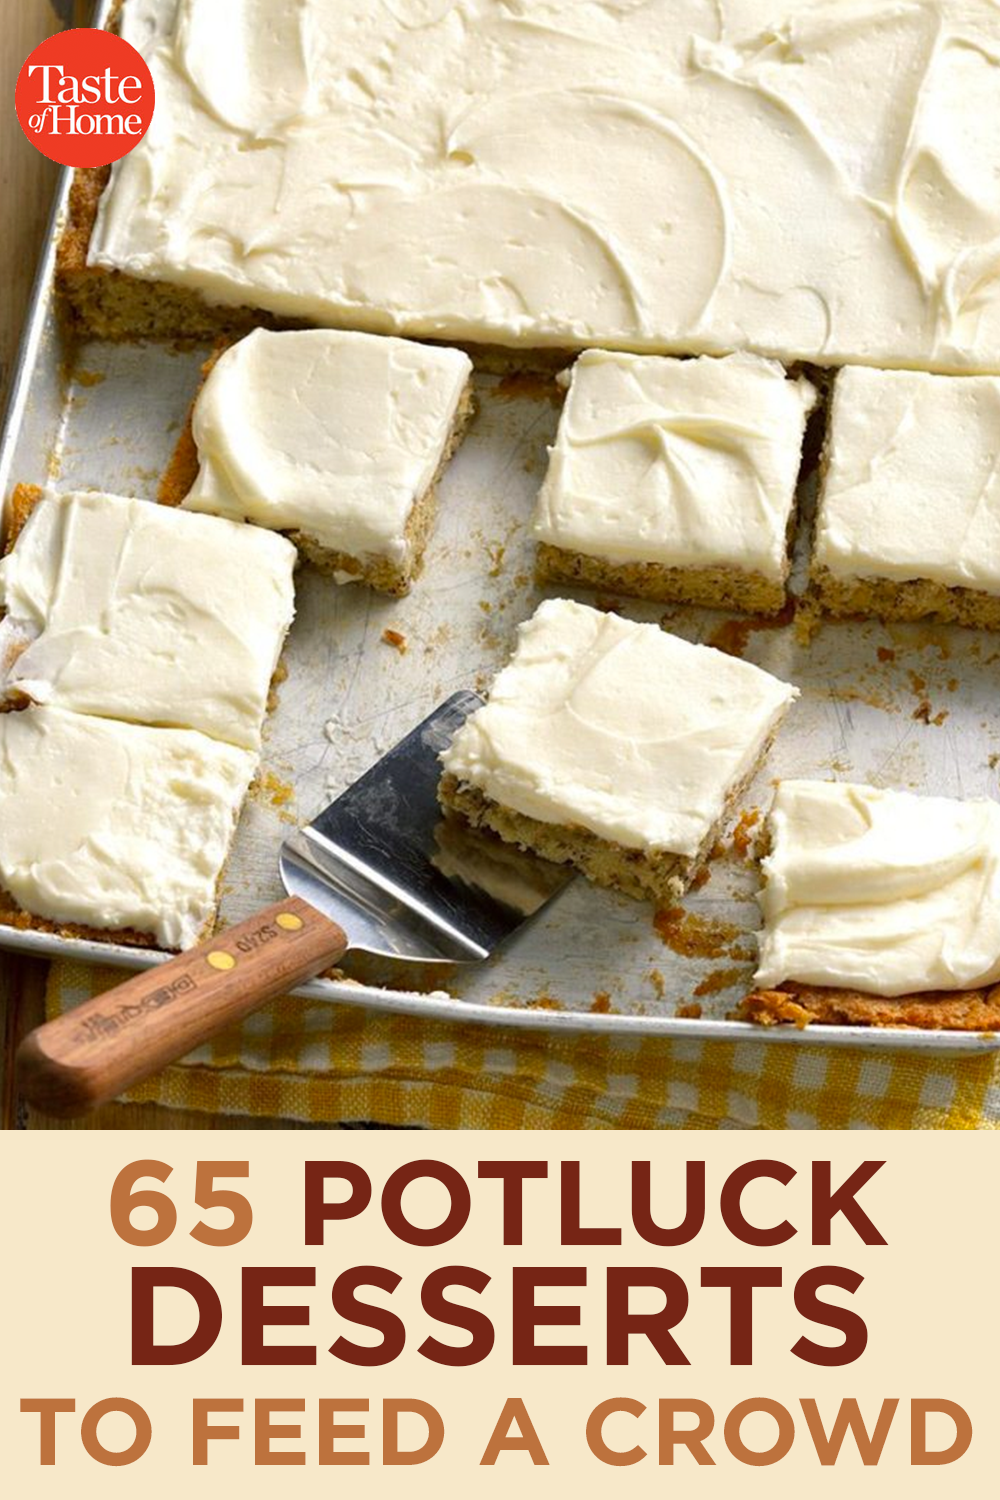 65 Potluck Desserts That Will Feed a Crowd -   21 large desserts For A Crowd ideas